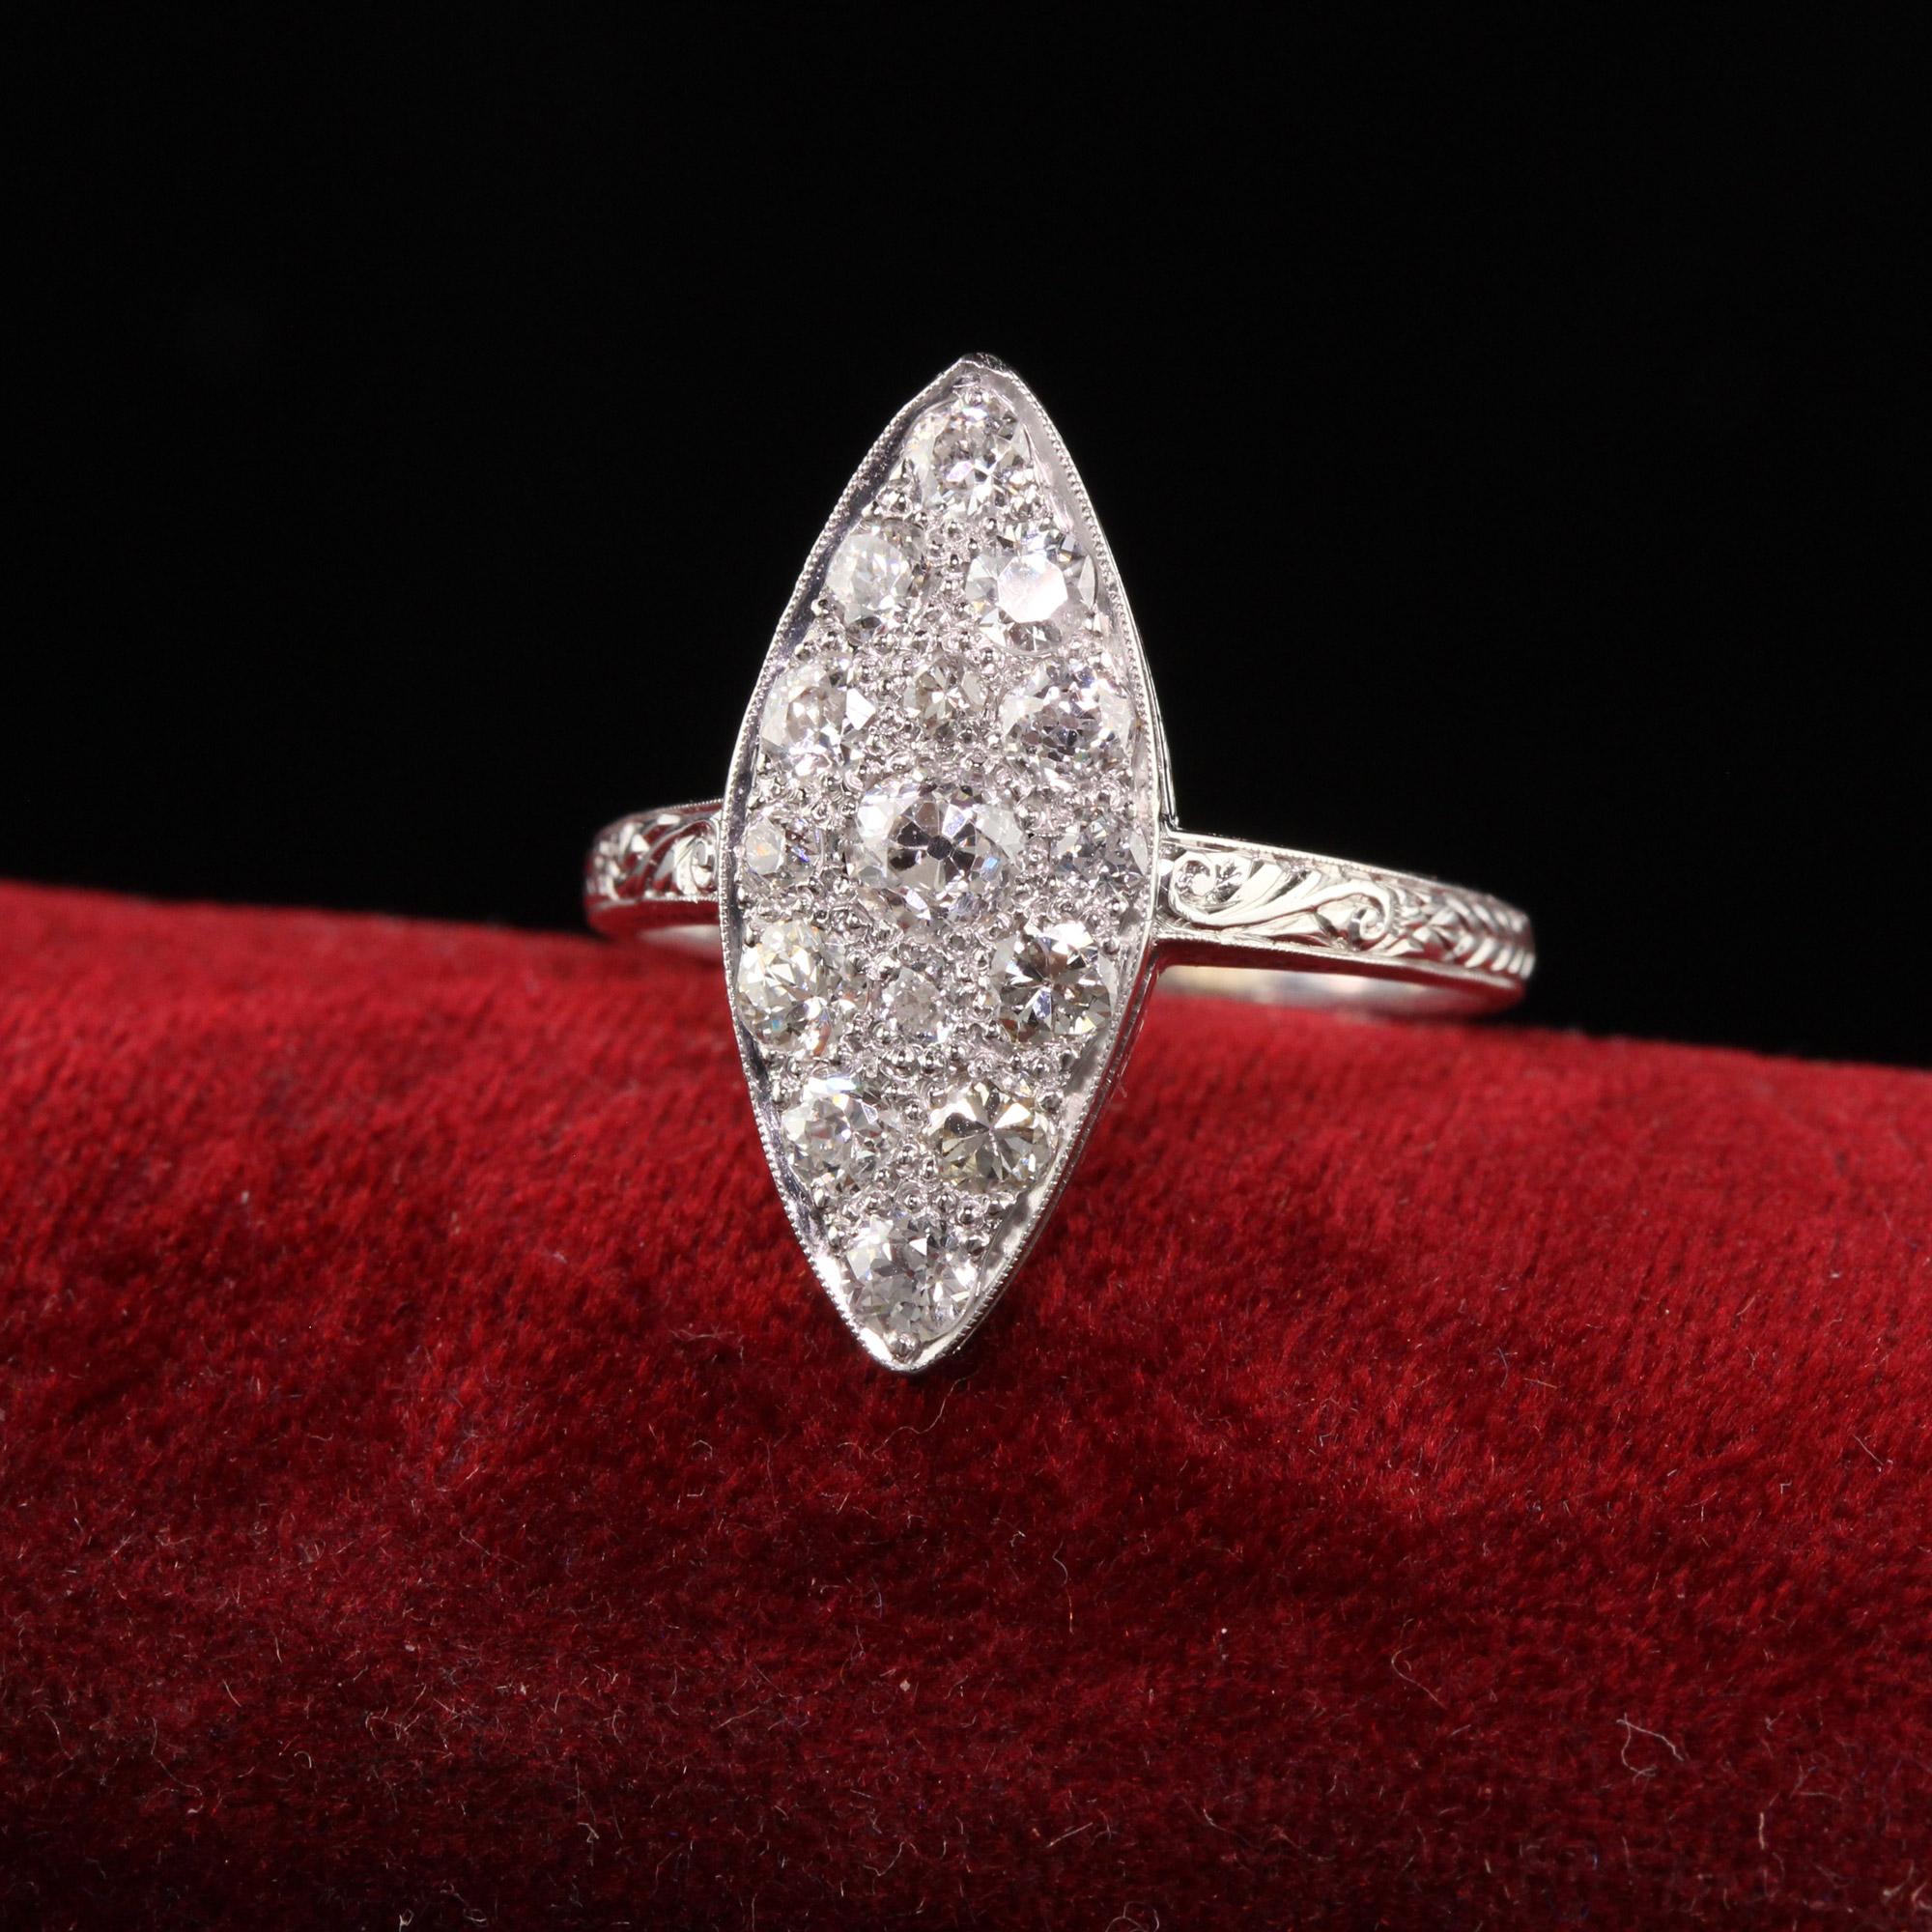 Beautiful Antique Edwardian 18K White Gold Platinum Top Old Euro Diamond Navette Ring. This beautiful ring is crafted in 18k white gold and platinum. The ring has old european diamonds set on the top in platinum and the shank and bottom gallery is